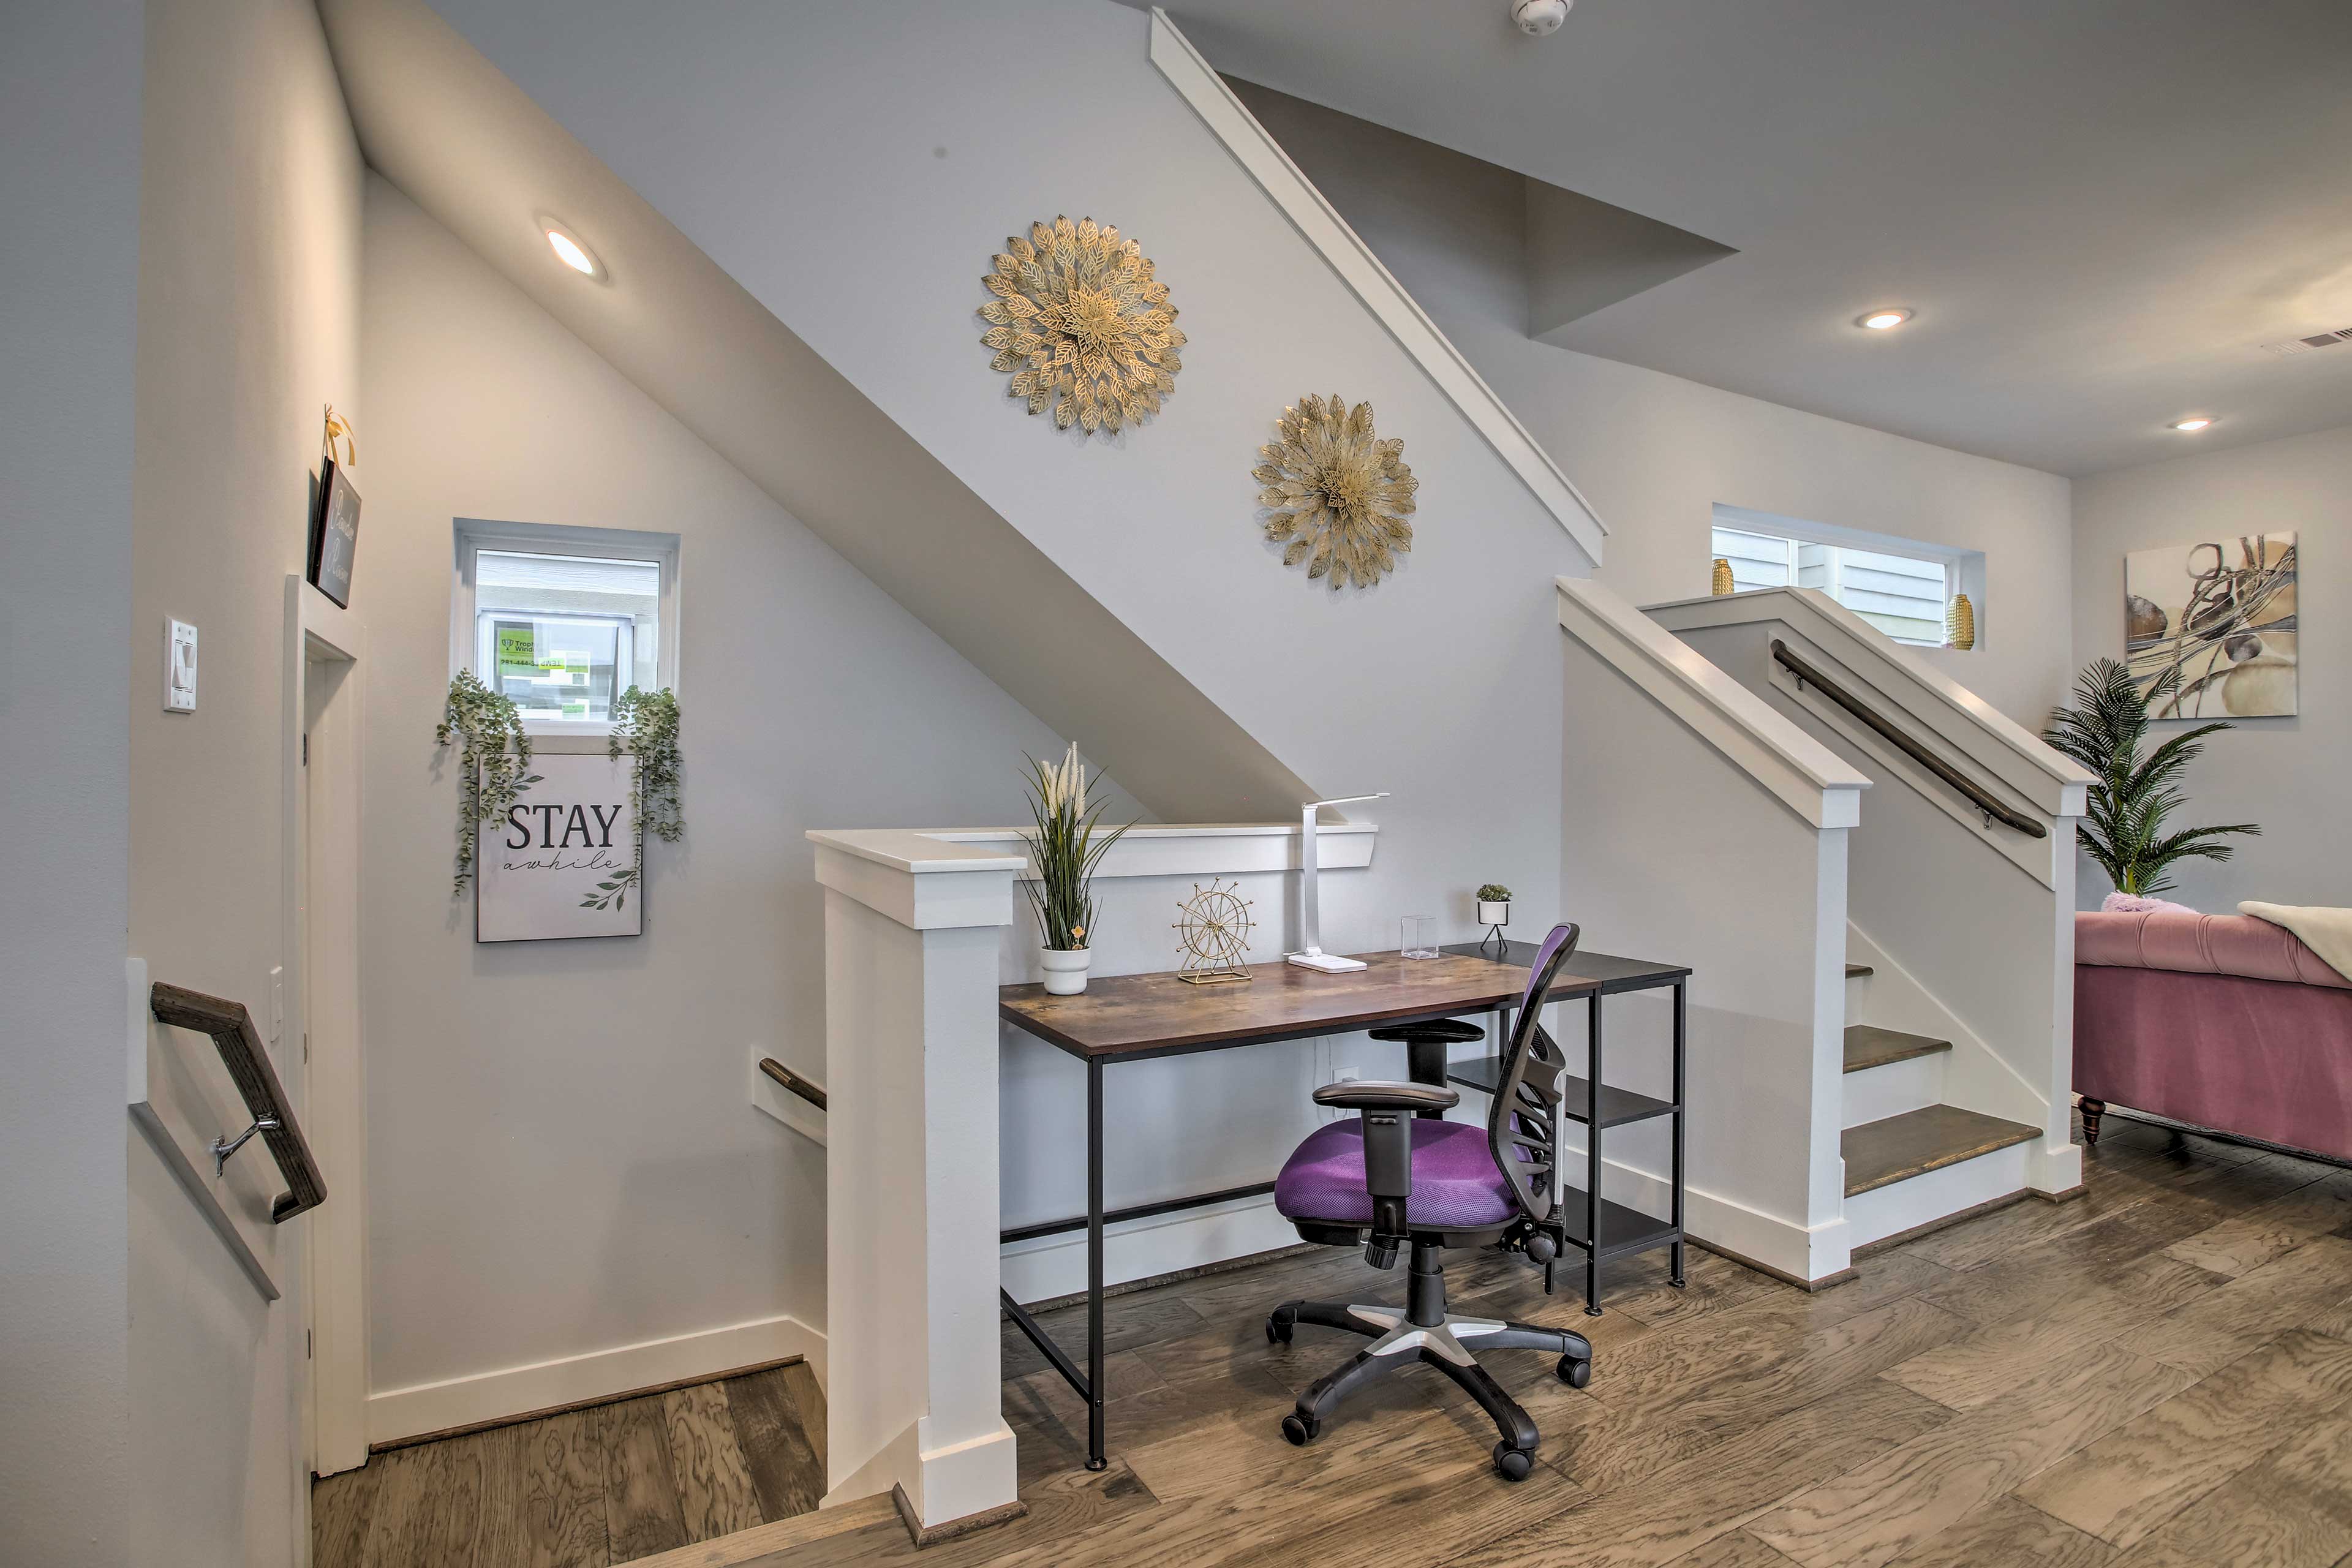 Workspace | Stairs Down to 2nd Floor/Entrance | Stairs Up to 3rd Floor